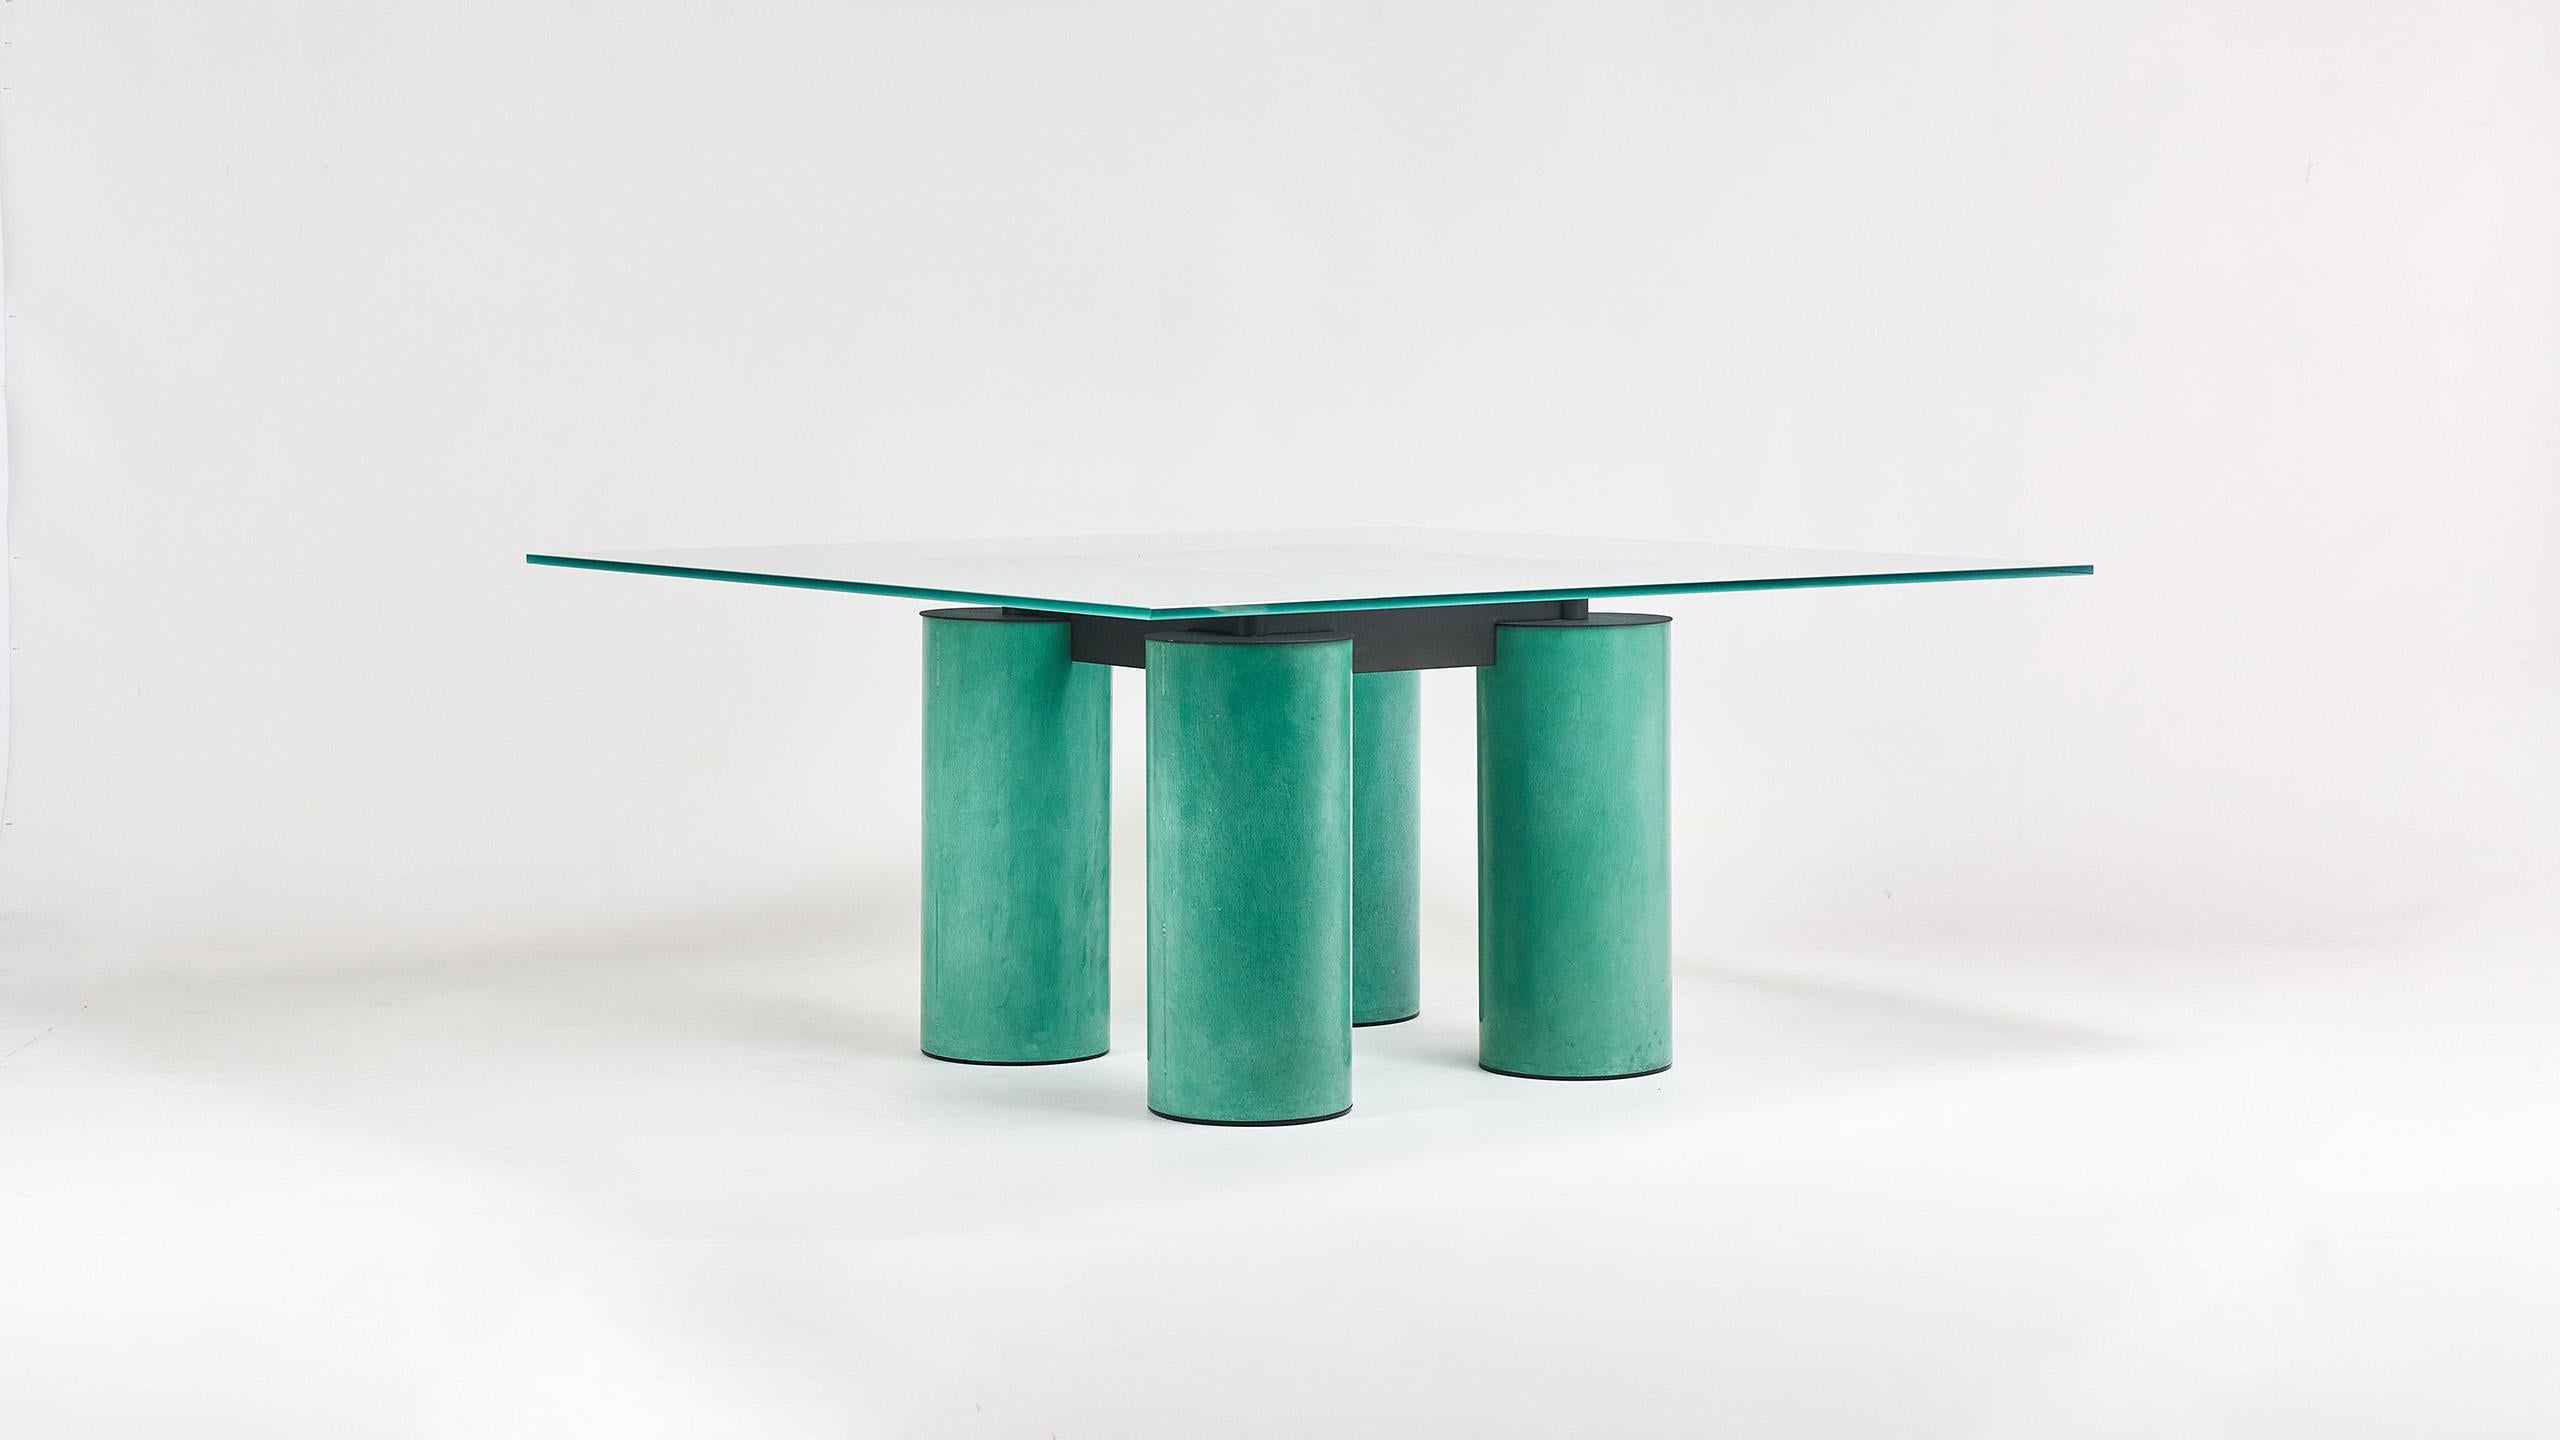 Square dining table by designers Lella & Massimo Vignelli and David Law for Acerbis, circa 1980.

Dating from the 80's, this iconic table has the particularity of joining the aesthetic codes of the Memphis movement to the traditional technique of